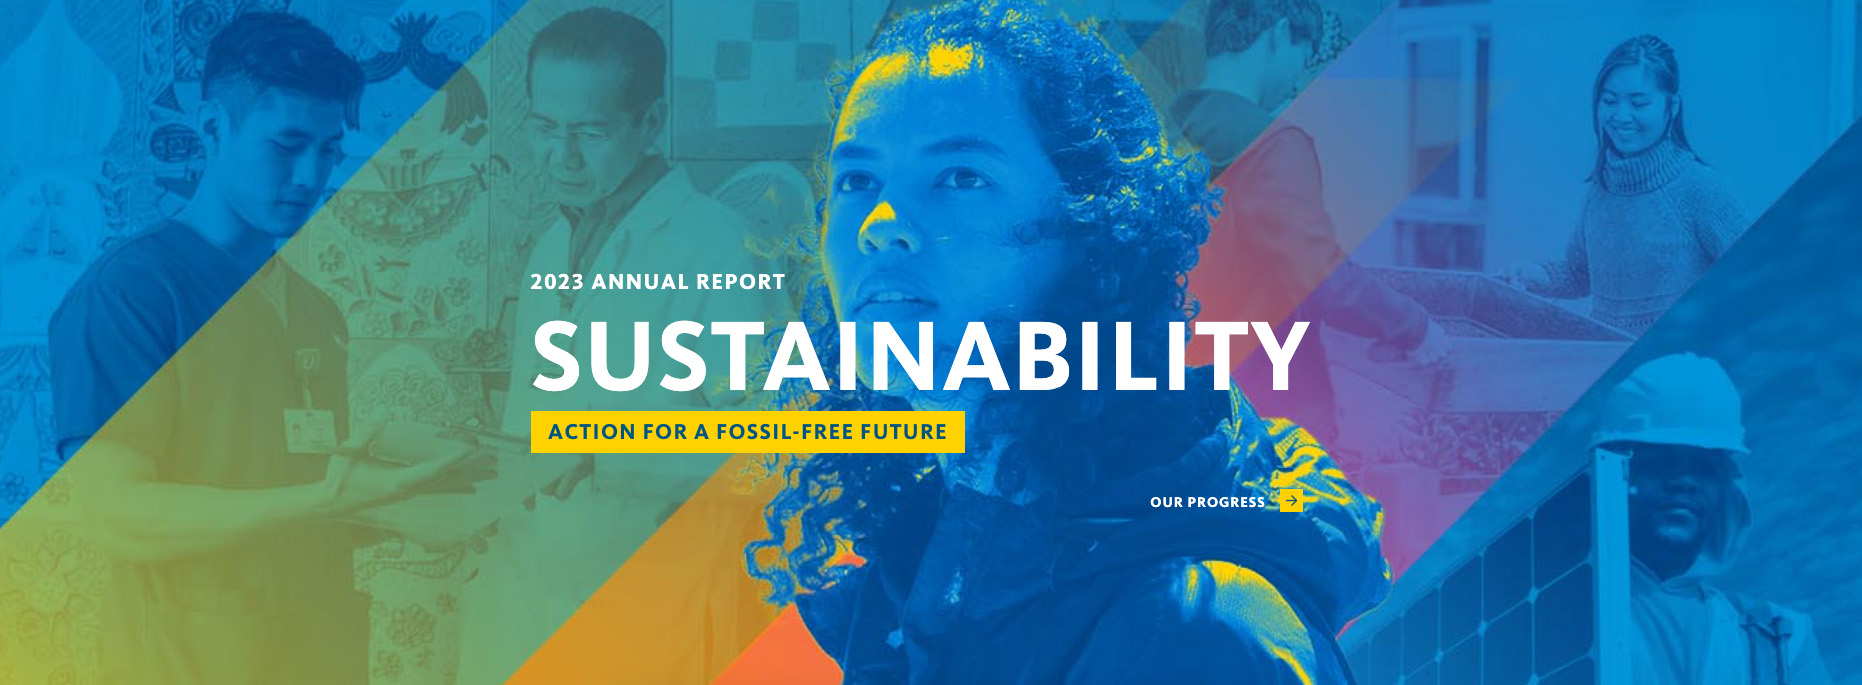 Photo collage of people doing sustainability tasks with SUSTAINABILITY ANNUAL REPORT wordmark overlaid